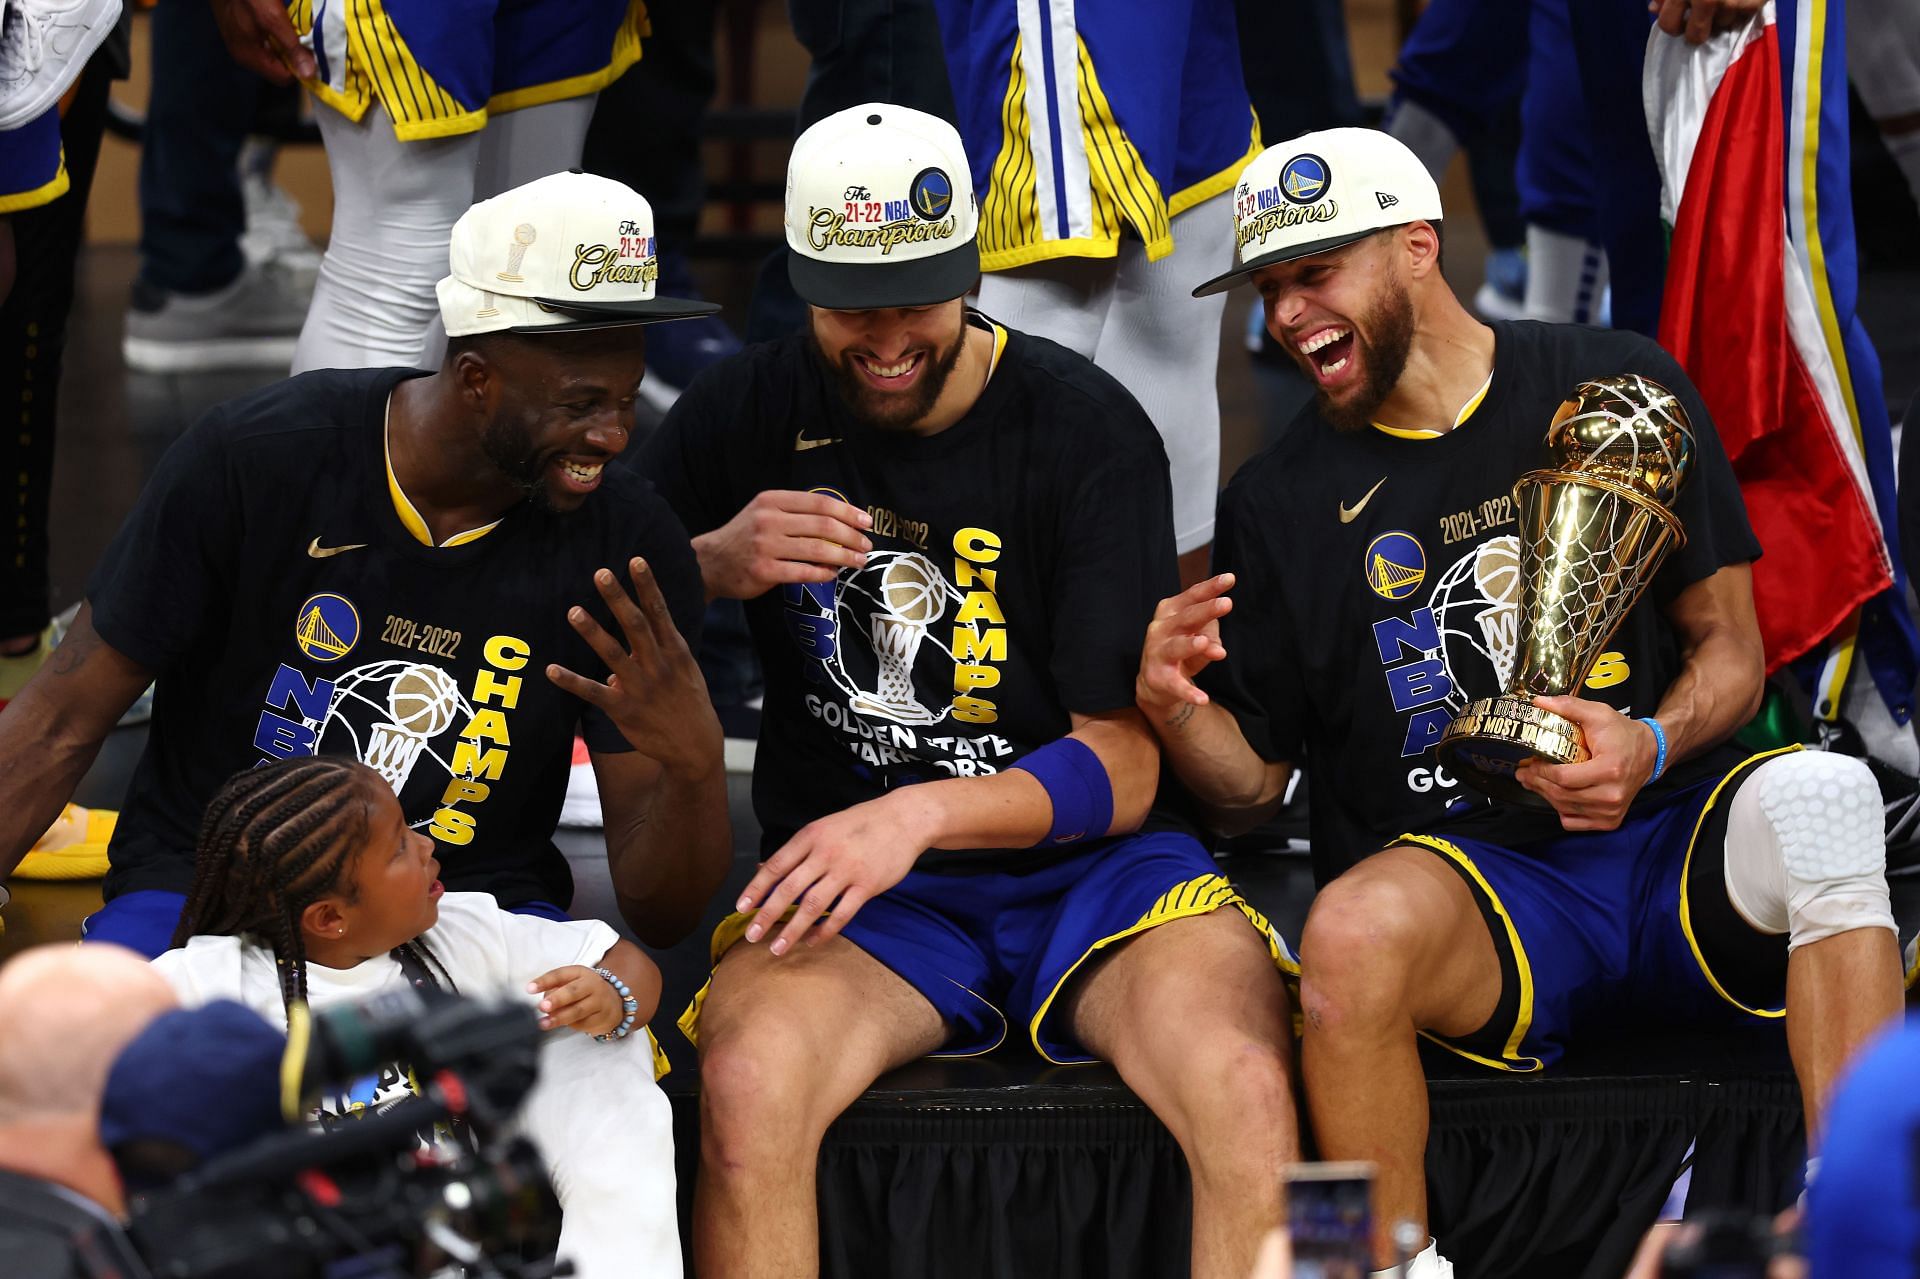 Draymond Green, Klay Thompson and Steph Curry celebrate winning the NBA title